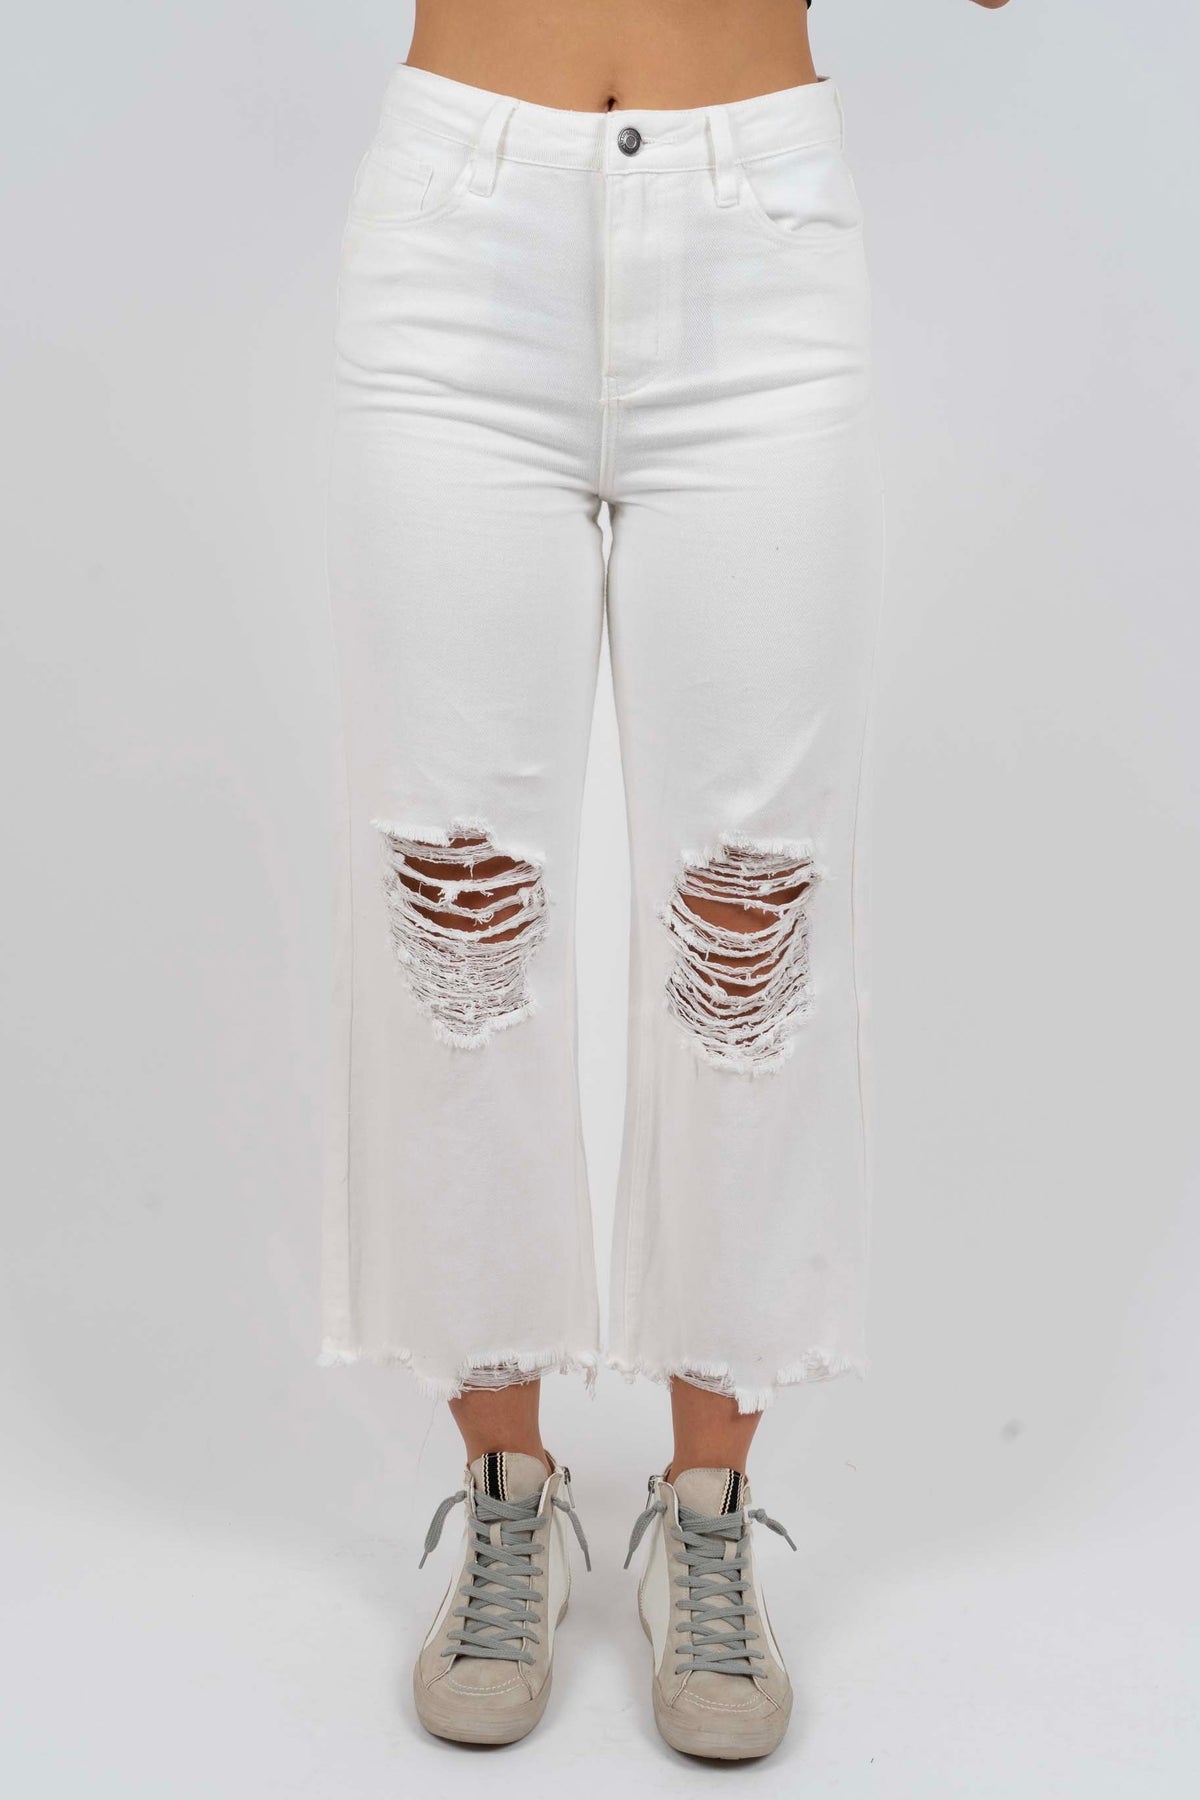 Back And Better Jeans (White)